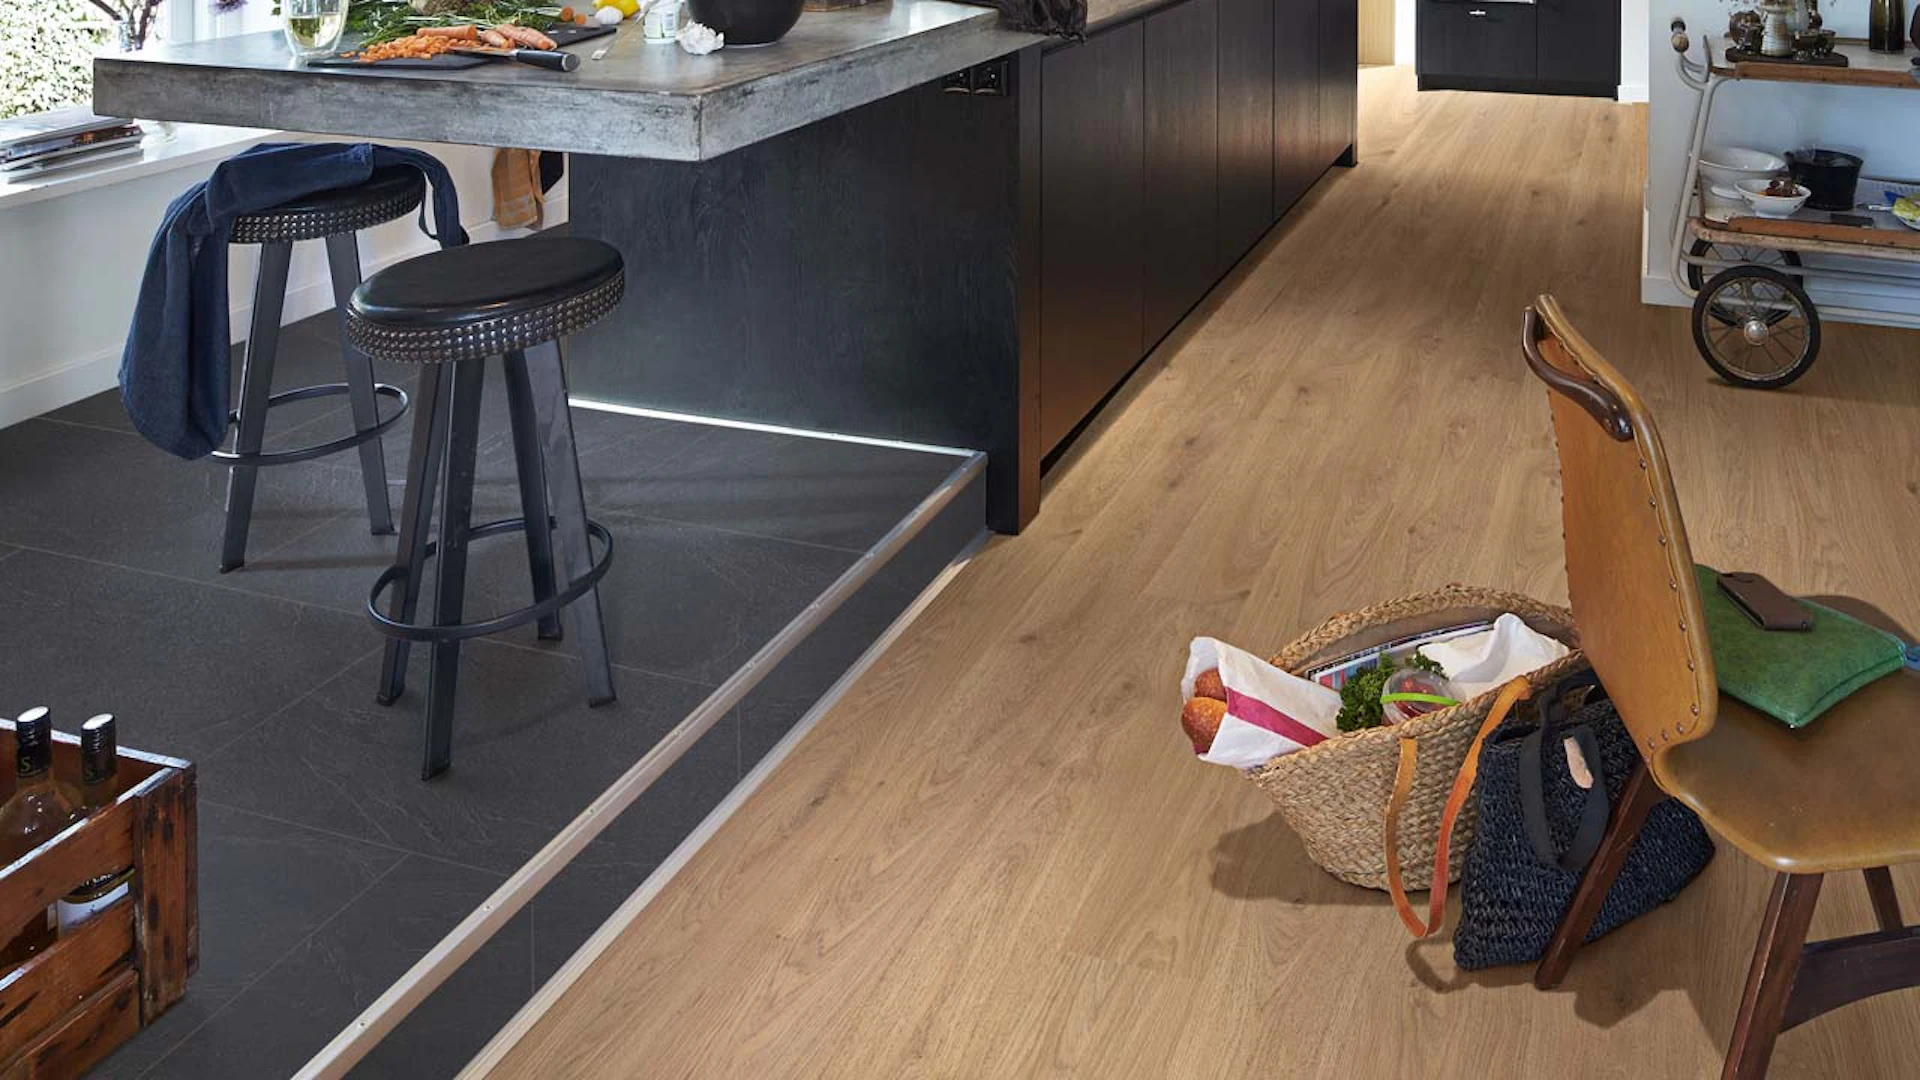 MEISTER Laminate - MeisterDesign LB 150 Slate anthracite 06137 | Made in Germany (600003-0857398-06137)